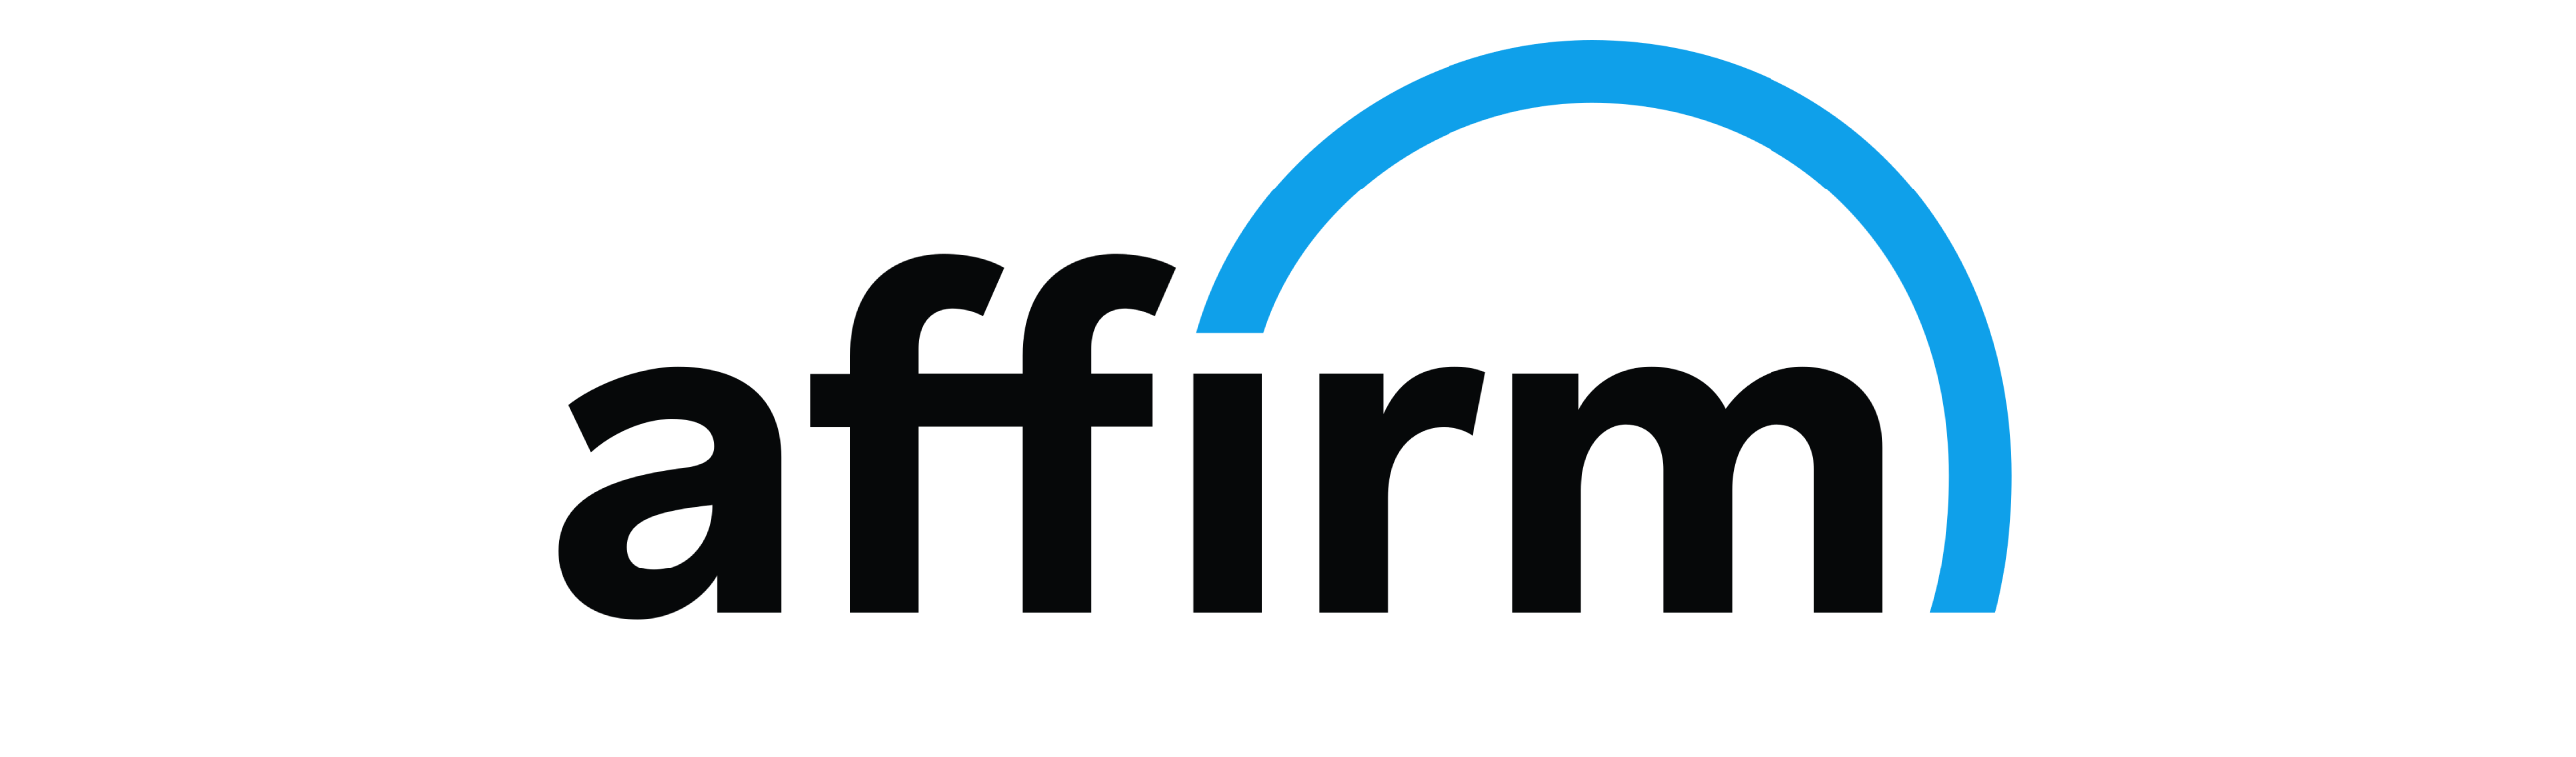 Affirm Financing: Enjoy the flexibility of 4 interest-free payments, pay over time, and receive a real-time decision with no hidden fees. Click "Learn More" to access additional information about Affirm and how to use this financing option.